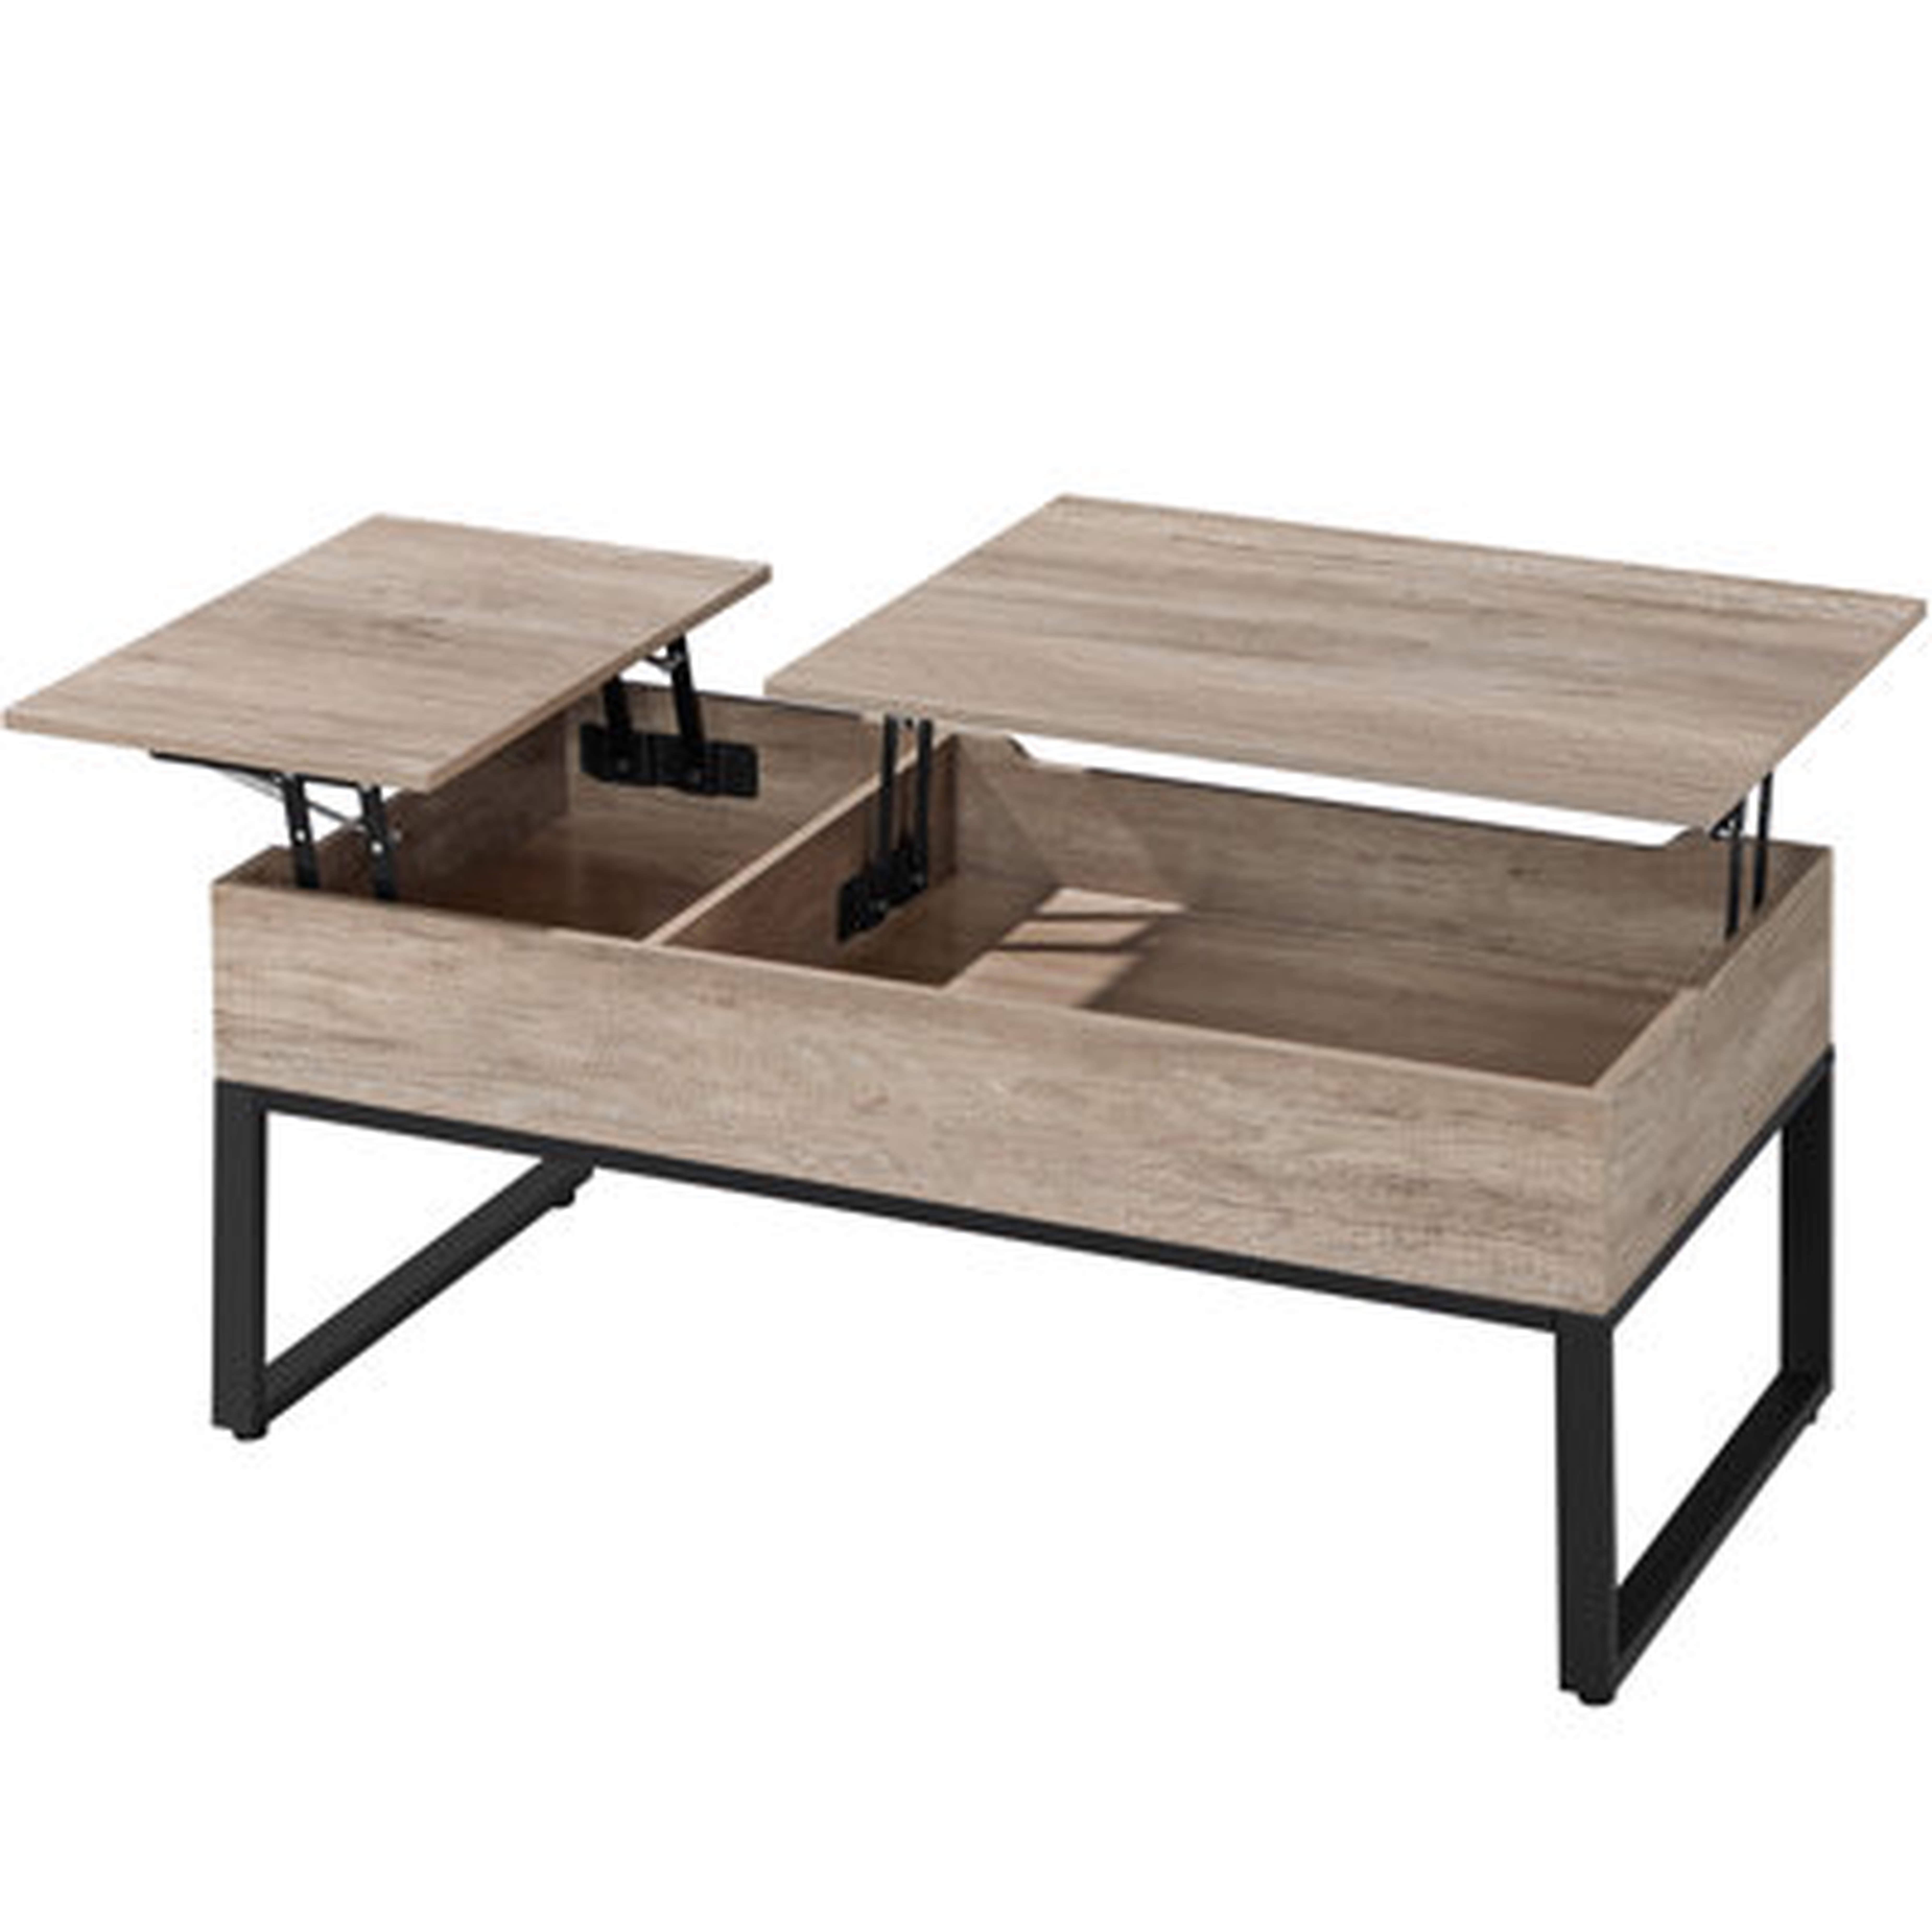 Lift Top Coffee Table With Two-Way Lift Tabletop - Wayfair